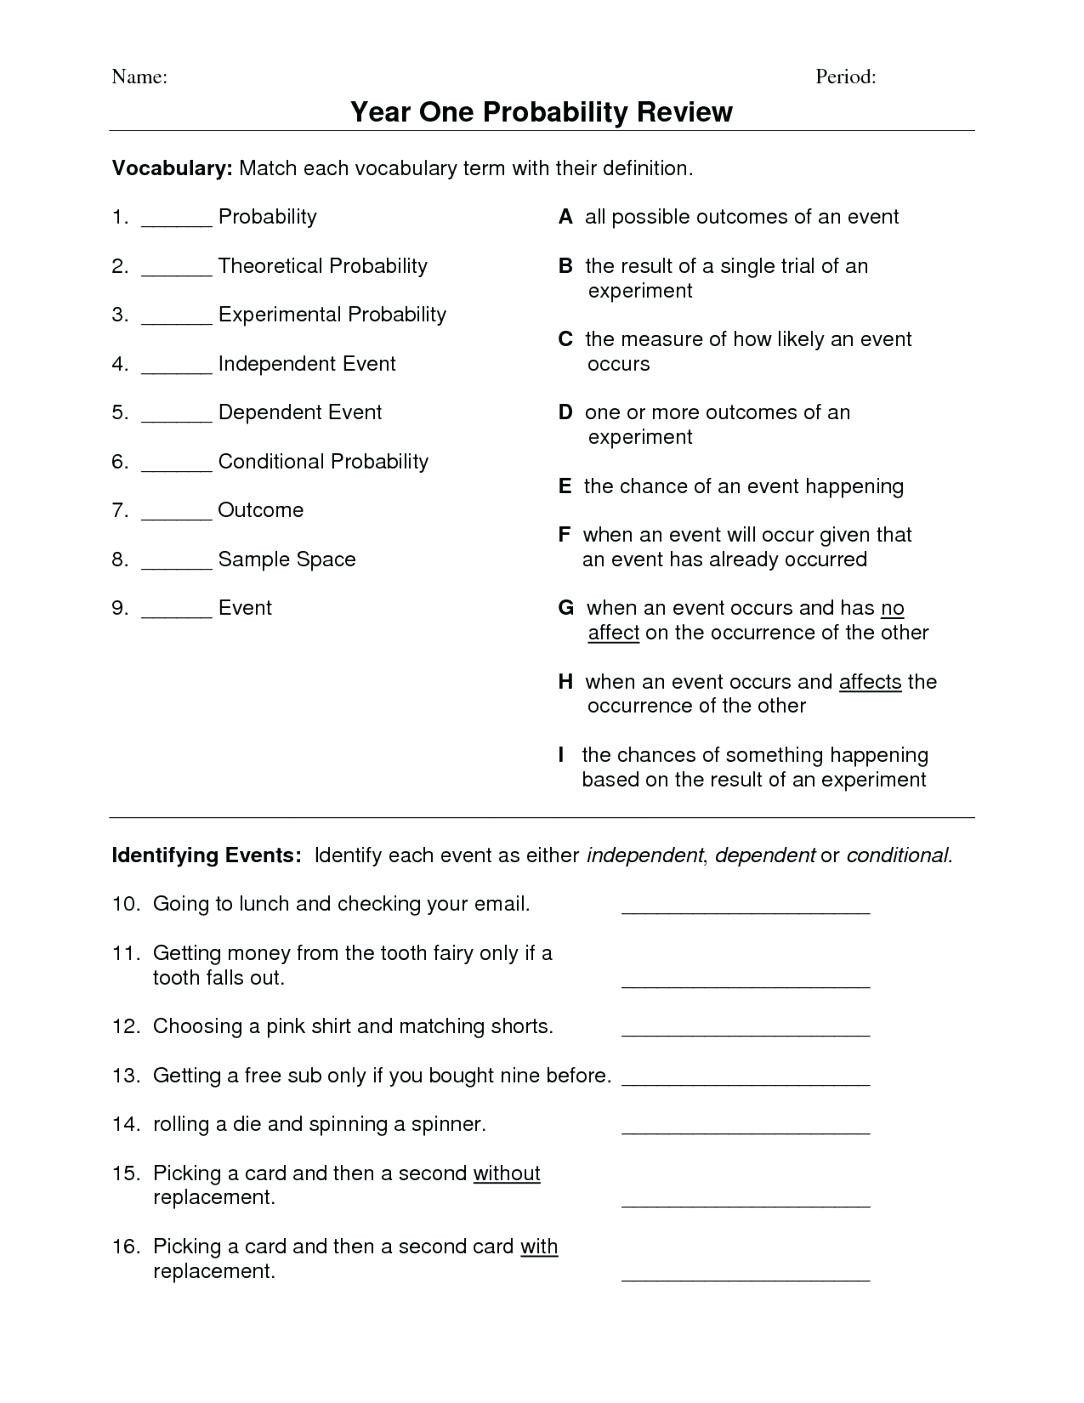 Theoretical Probability Worksheets 7th Grade theoretical Probability Worksheet 7th Grade